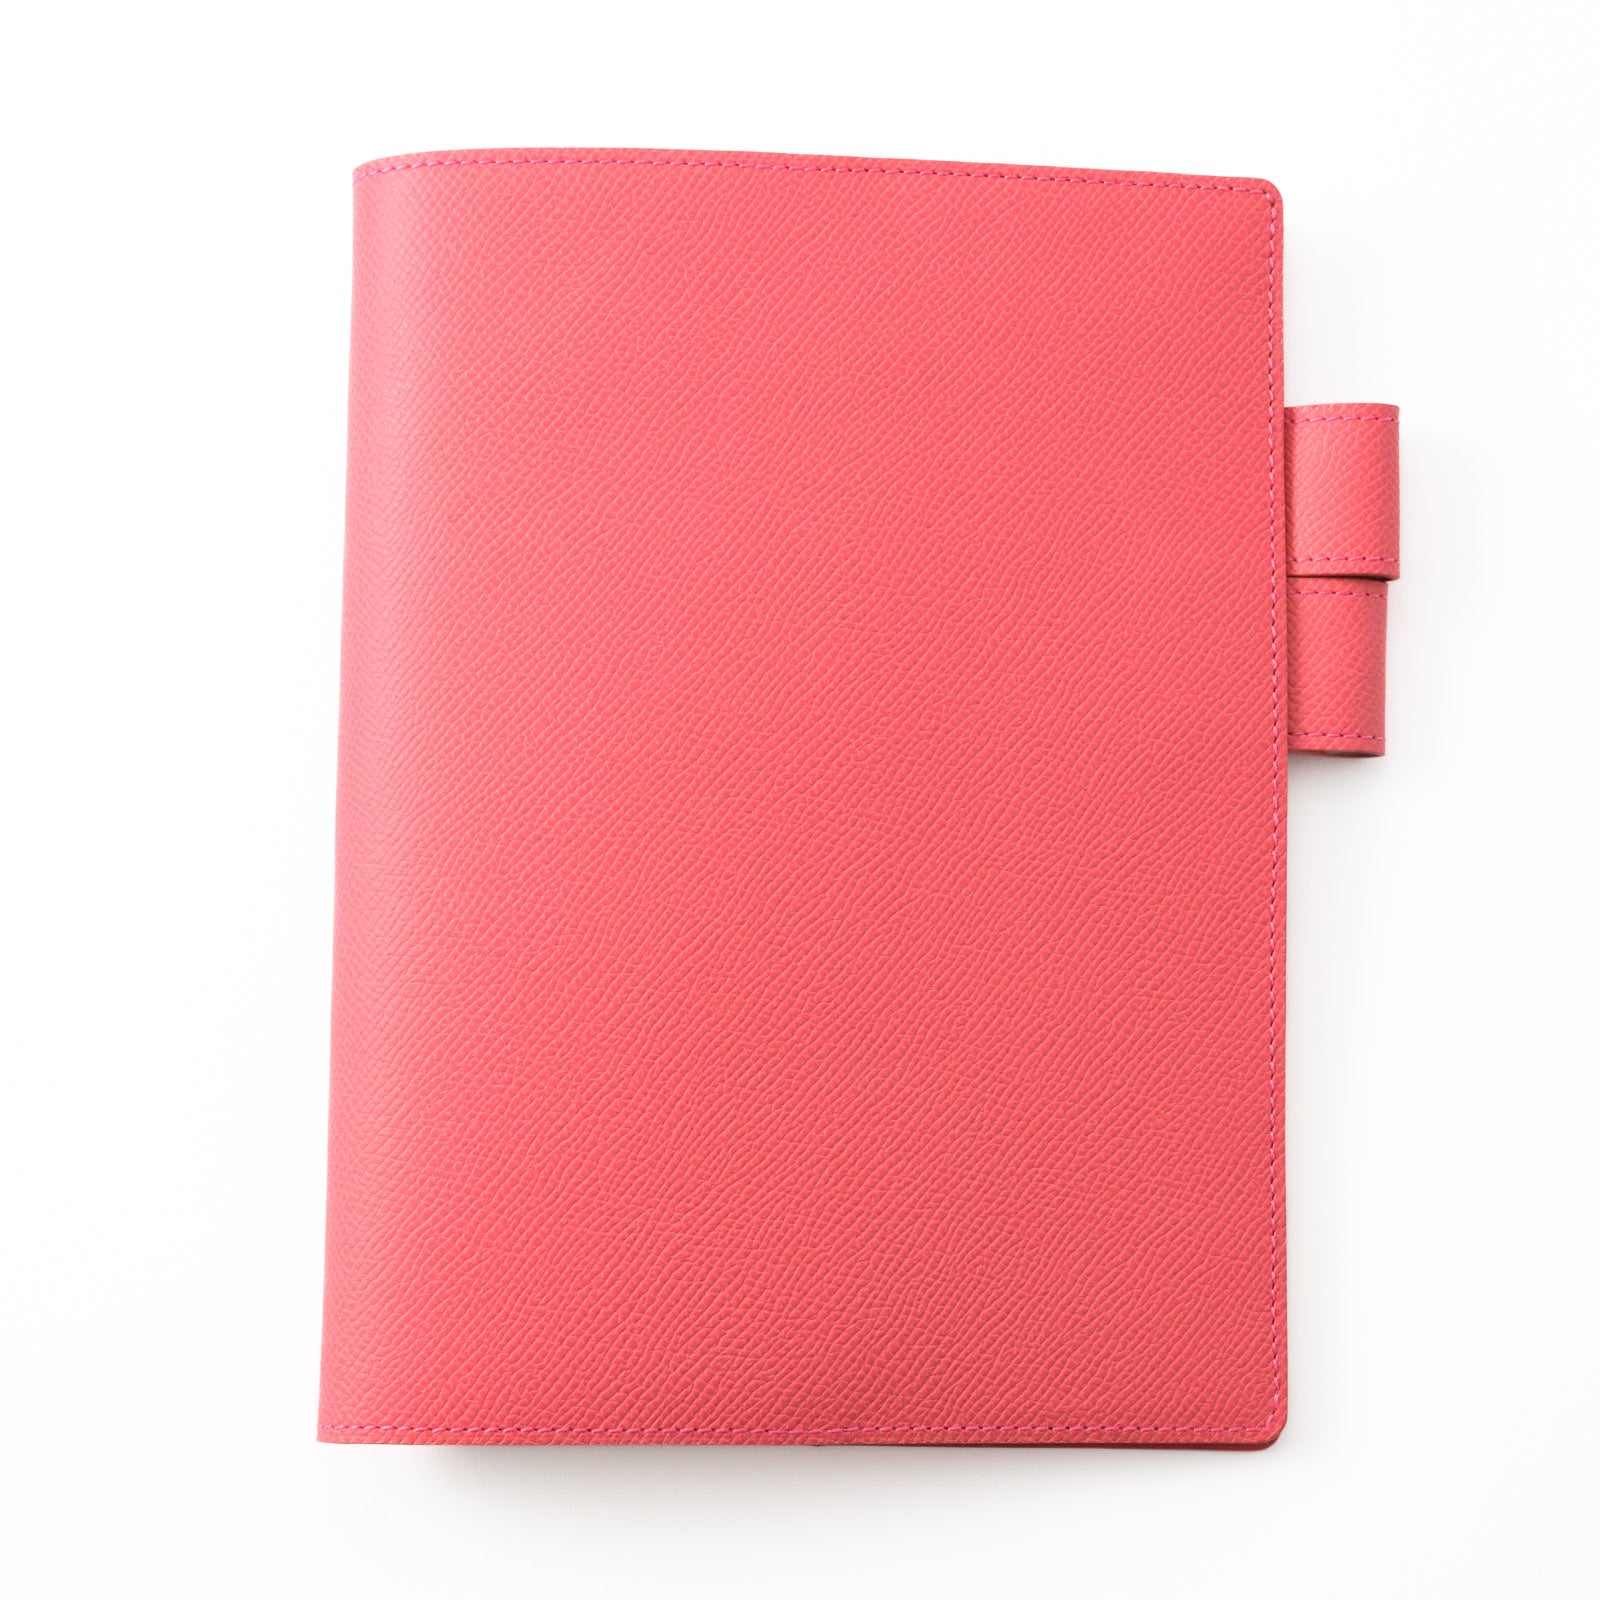 [6th Anniversary Thanksgiving] Hobonichi Cousin Notebook Cover (A5 Size) Veau Epsom